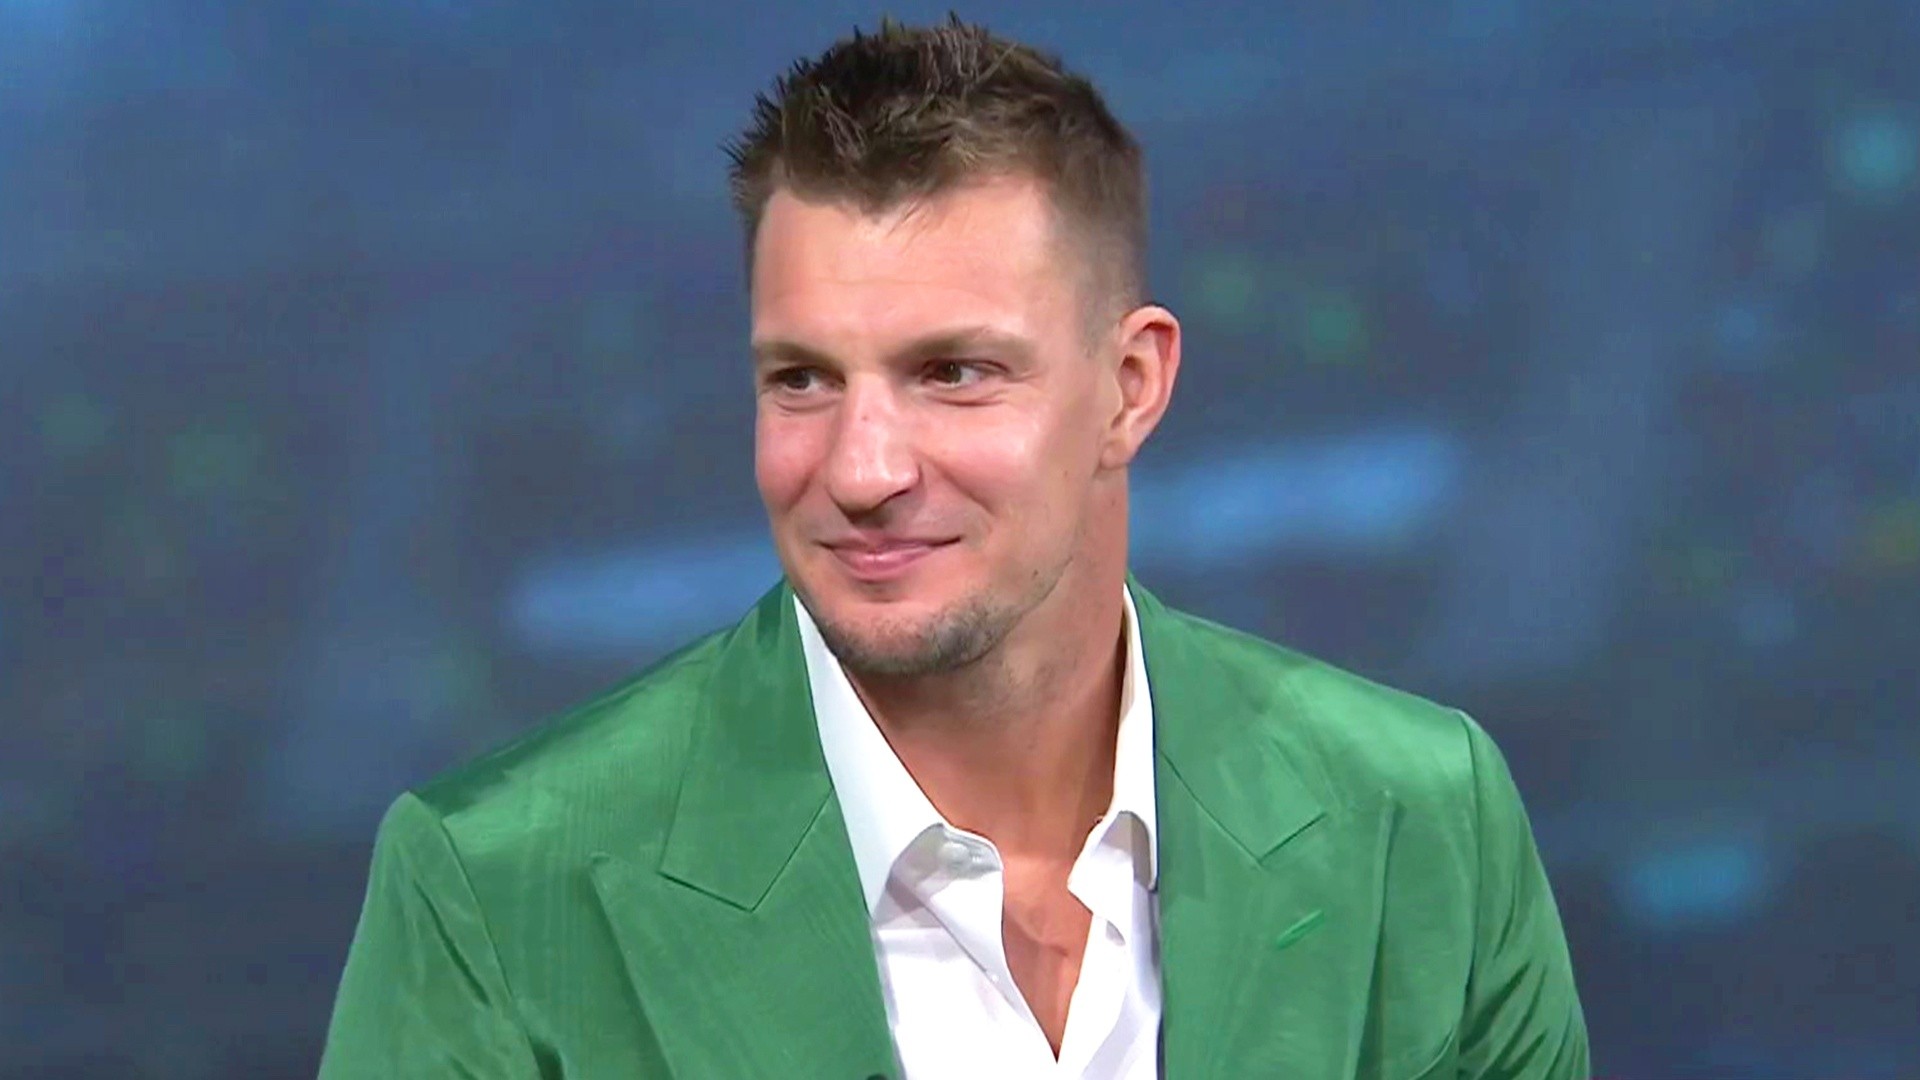 Rob Gronkowski Would Be The Perfect Porn Star, Says Actual Porn Star